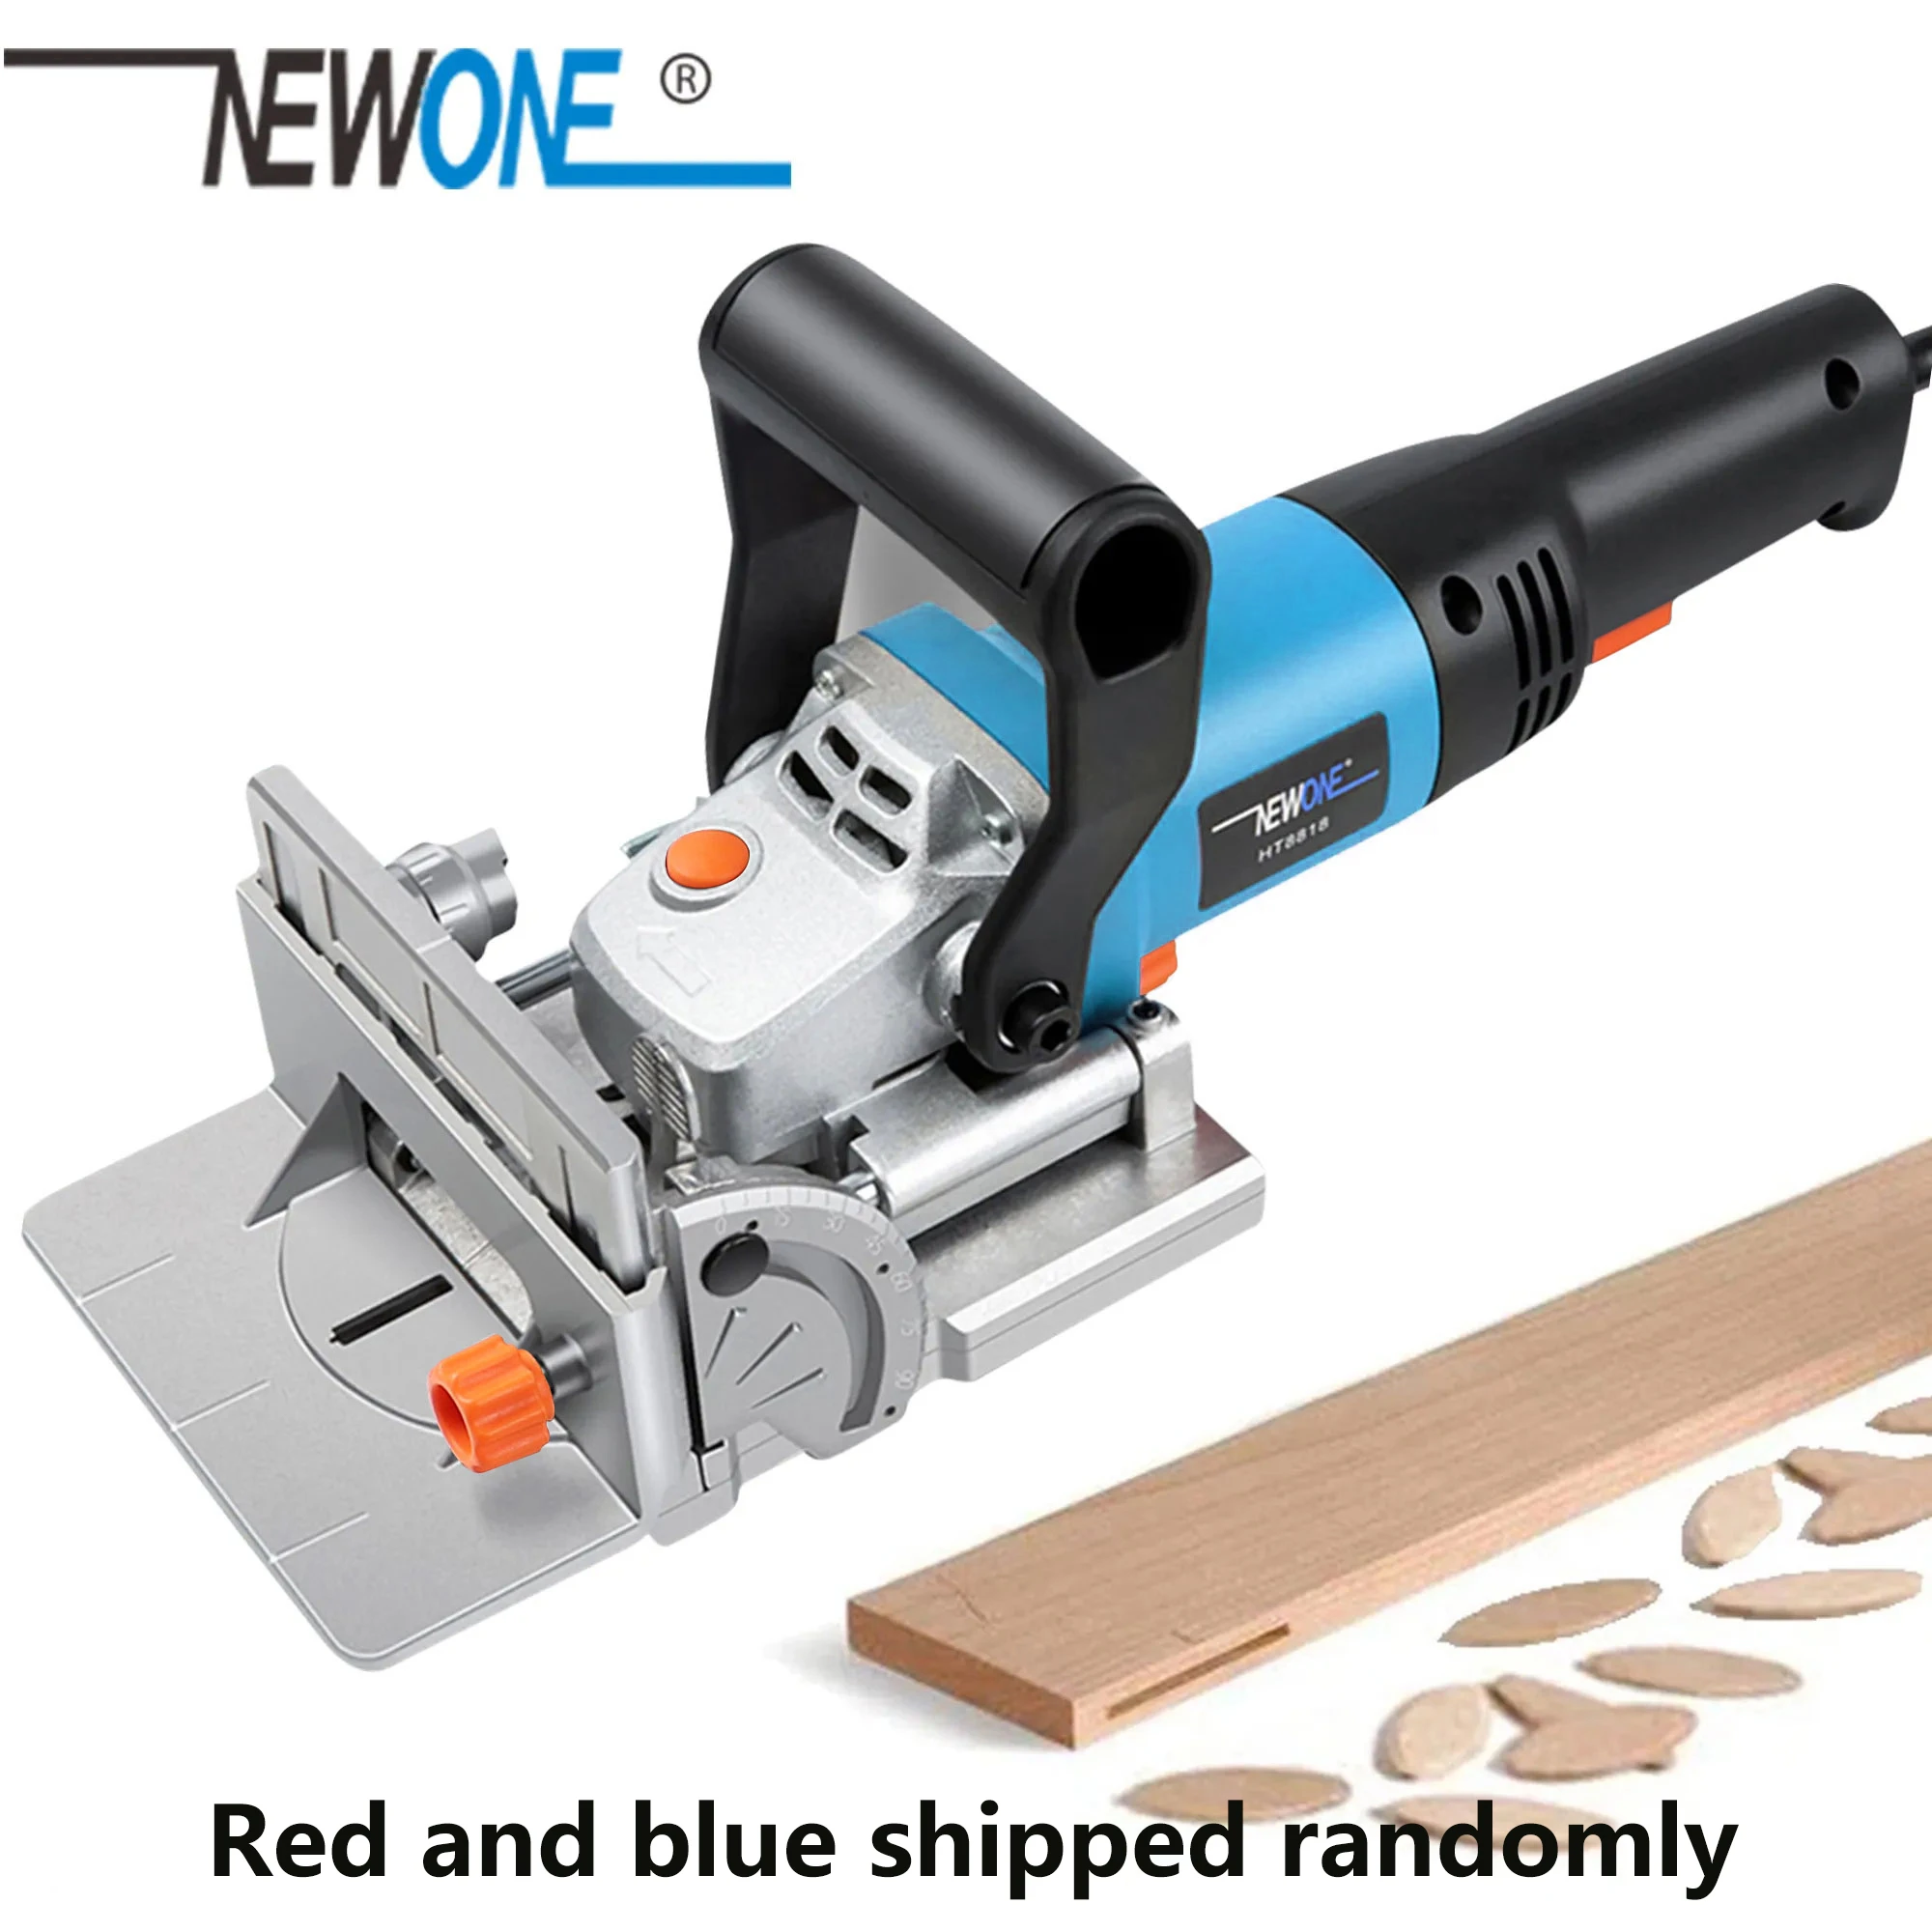 NEWONE Power Tool 760W Biscuit joiner Slotting Jointer Sewing Machine Woodworking Tenoner  groove Machine Plate joiner